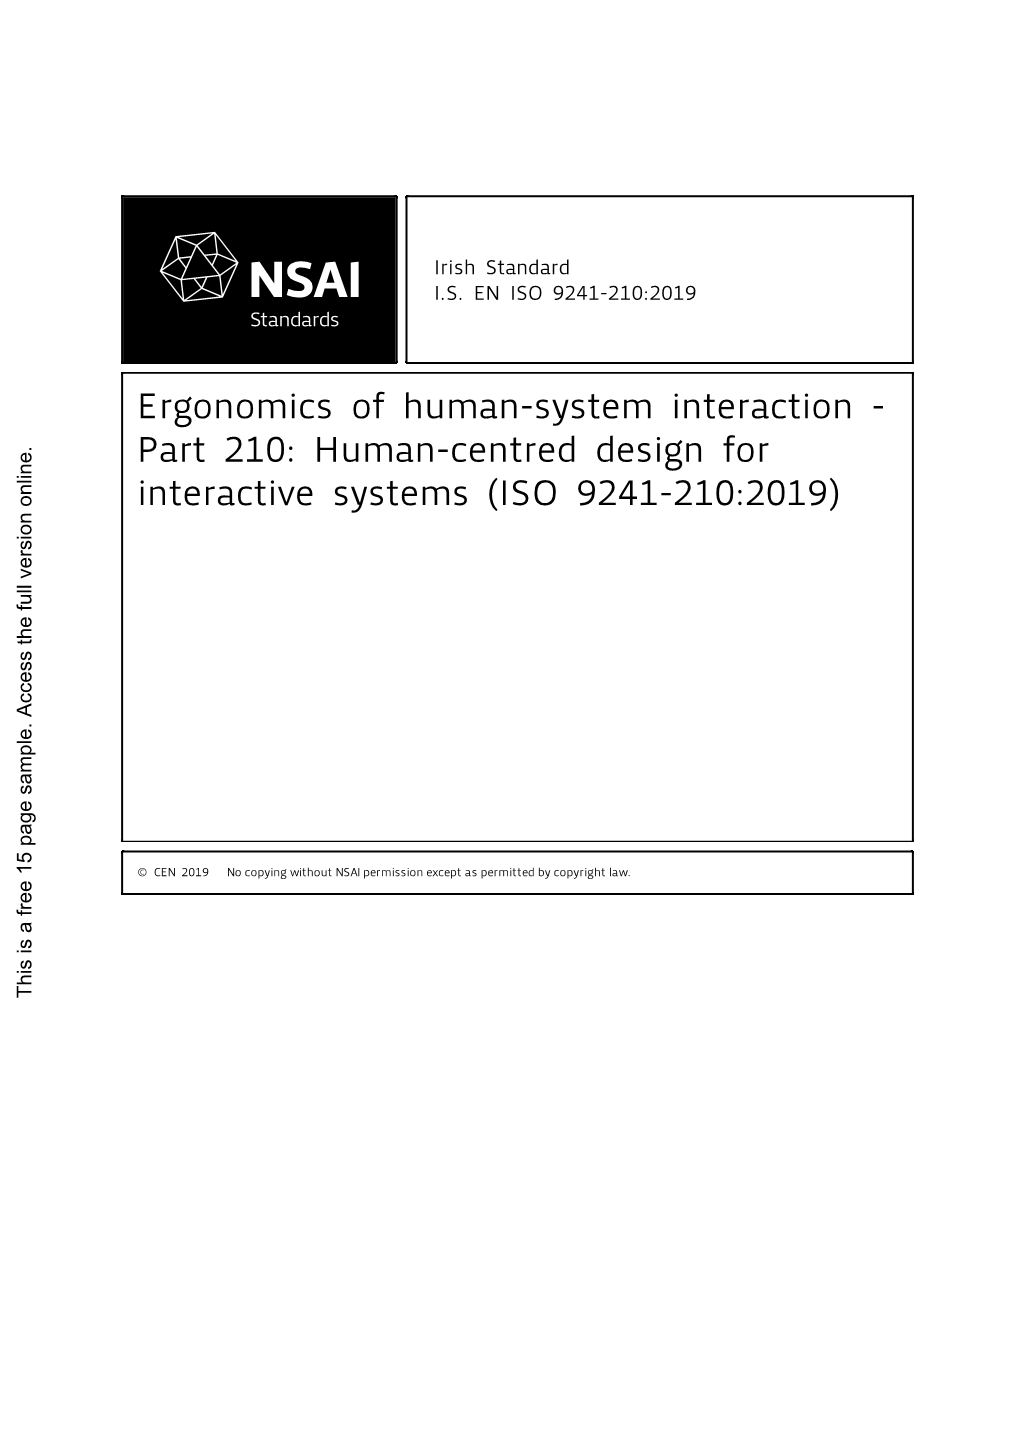 Human-Centred Design for Interactive Systems (ISO 9241-210:2019)